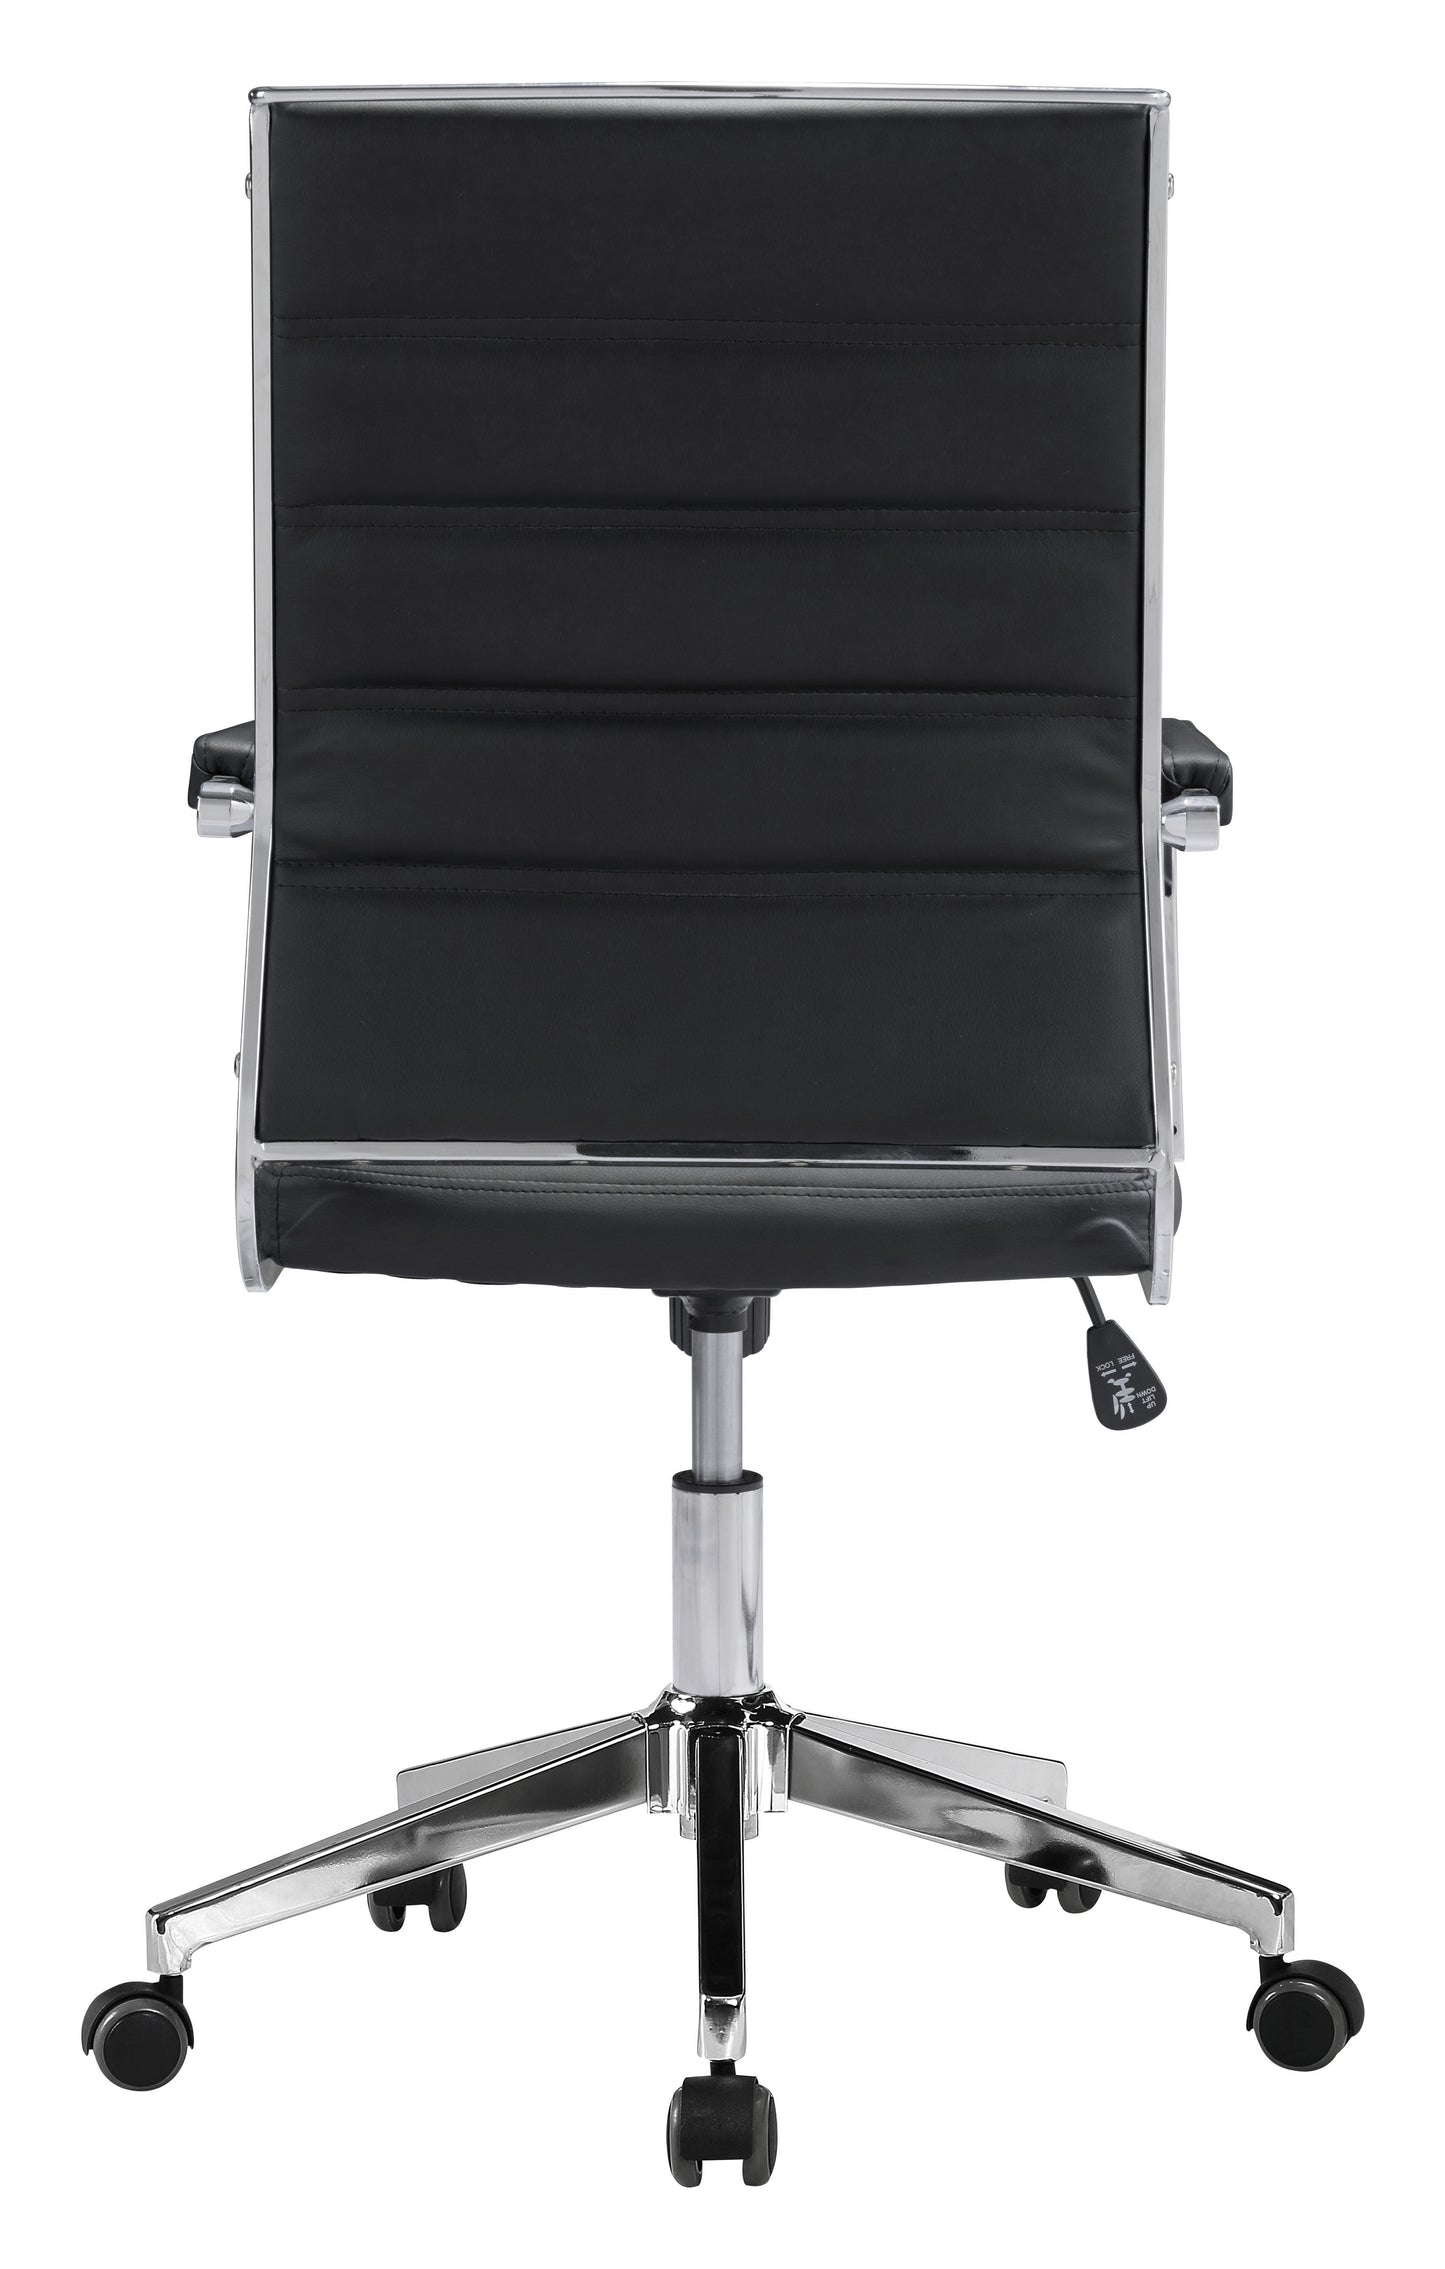 Liderato Office Chair